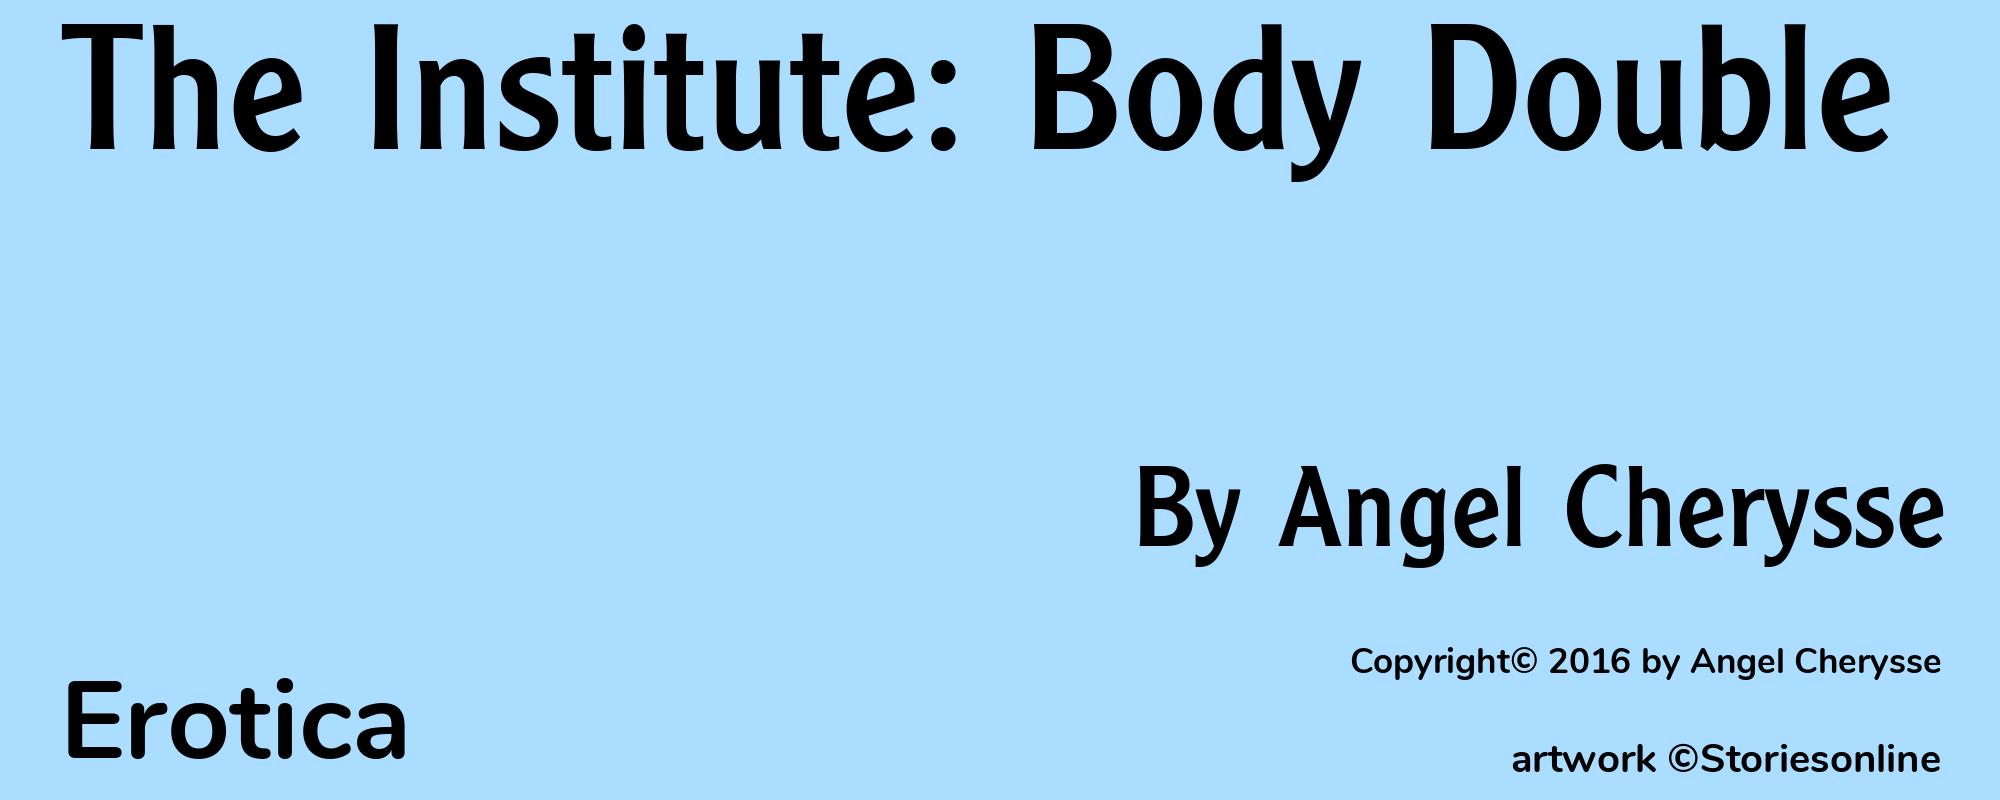 The Institute: Body Double - Cover